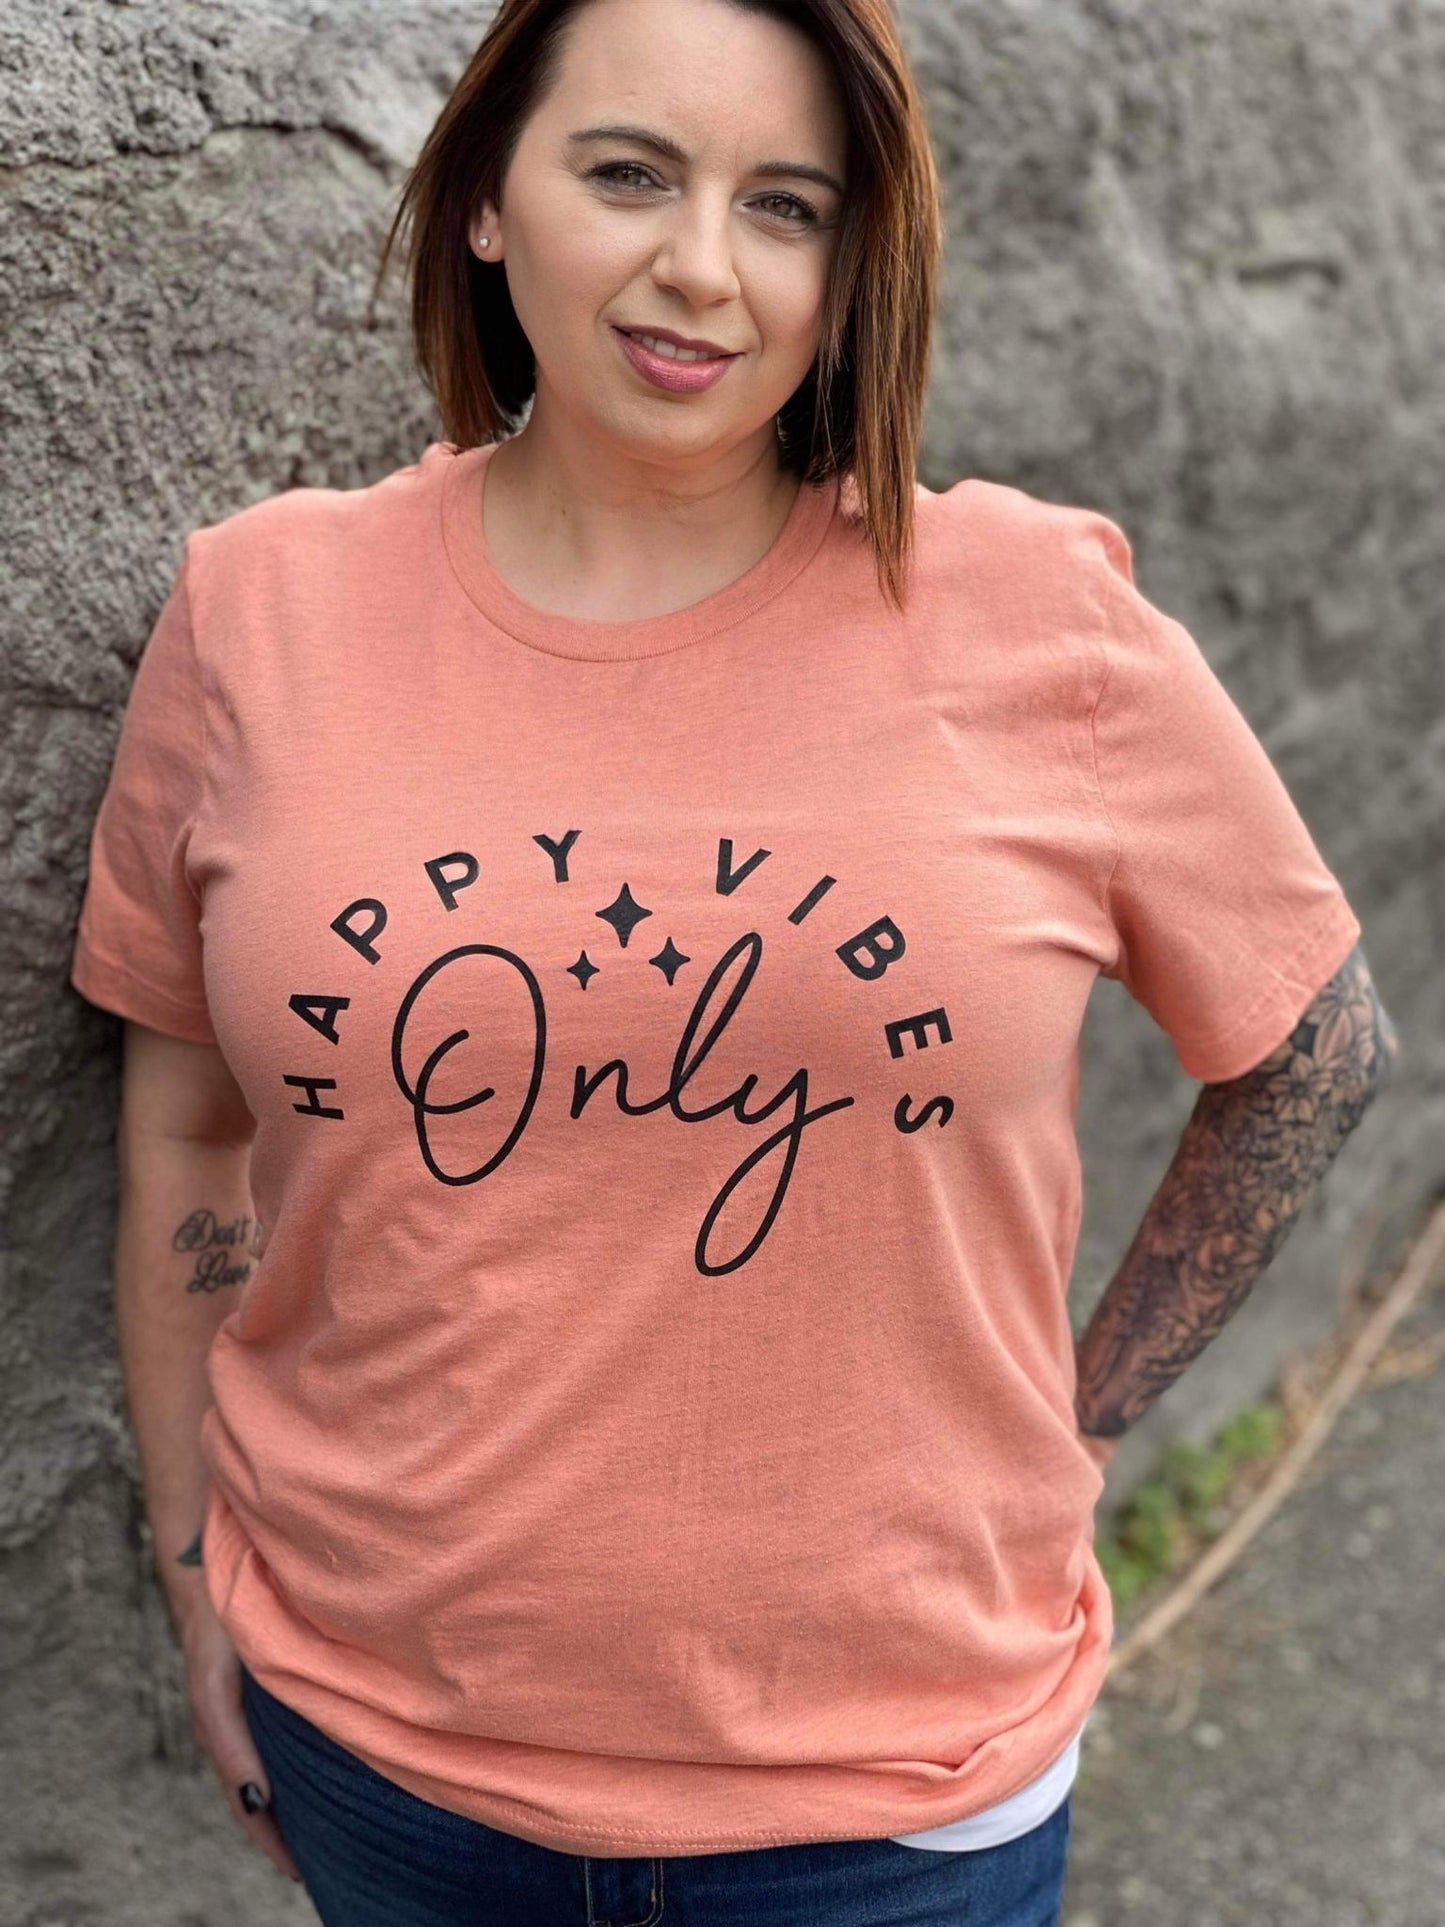 Happy Vibes Only Tee- ASK Apparel LLC